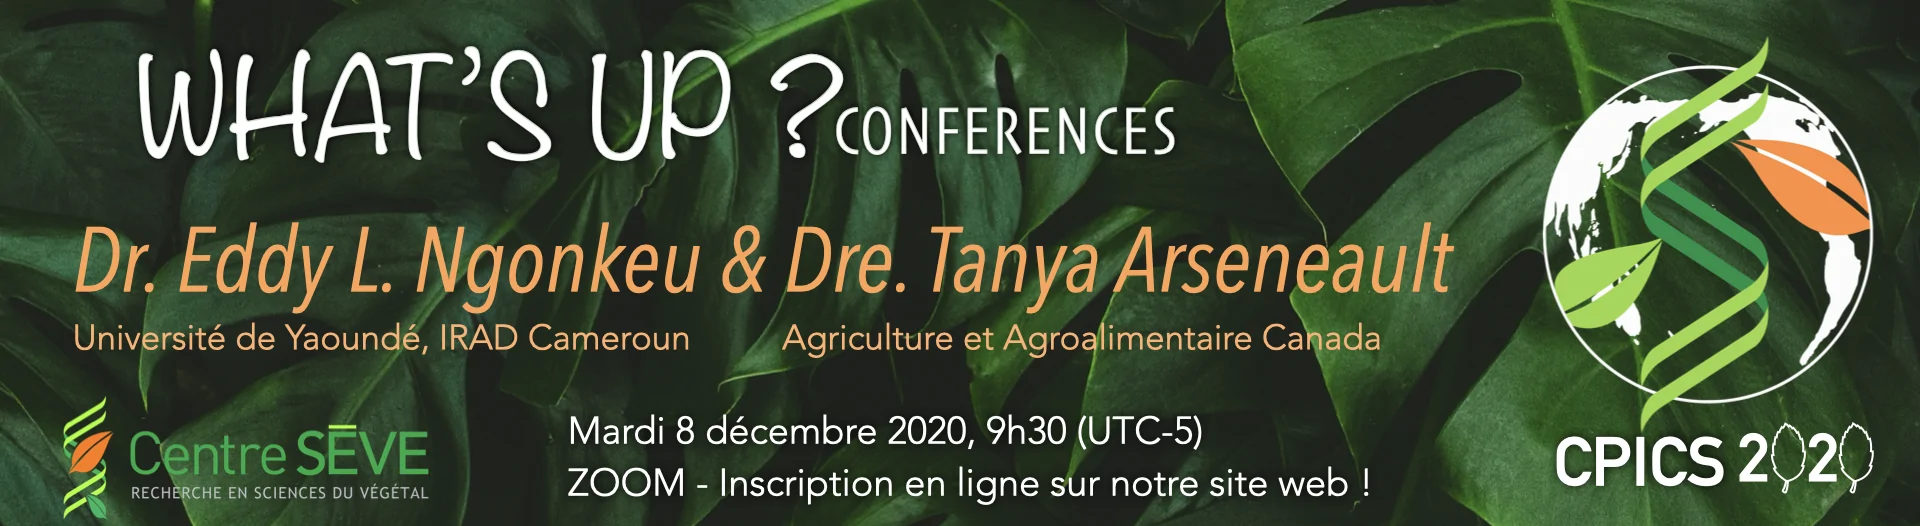 What's up conferences December 8<sup>th</sup> at 9h20 am with Dr. Eddy L. Ngonkeu from Université de Yaoundé and Dr. Tanya Arseneault from Agriculture et Agroalimentaire Canada